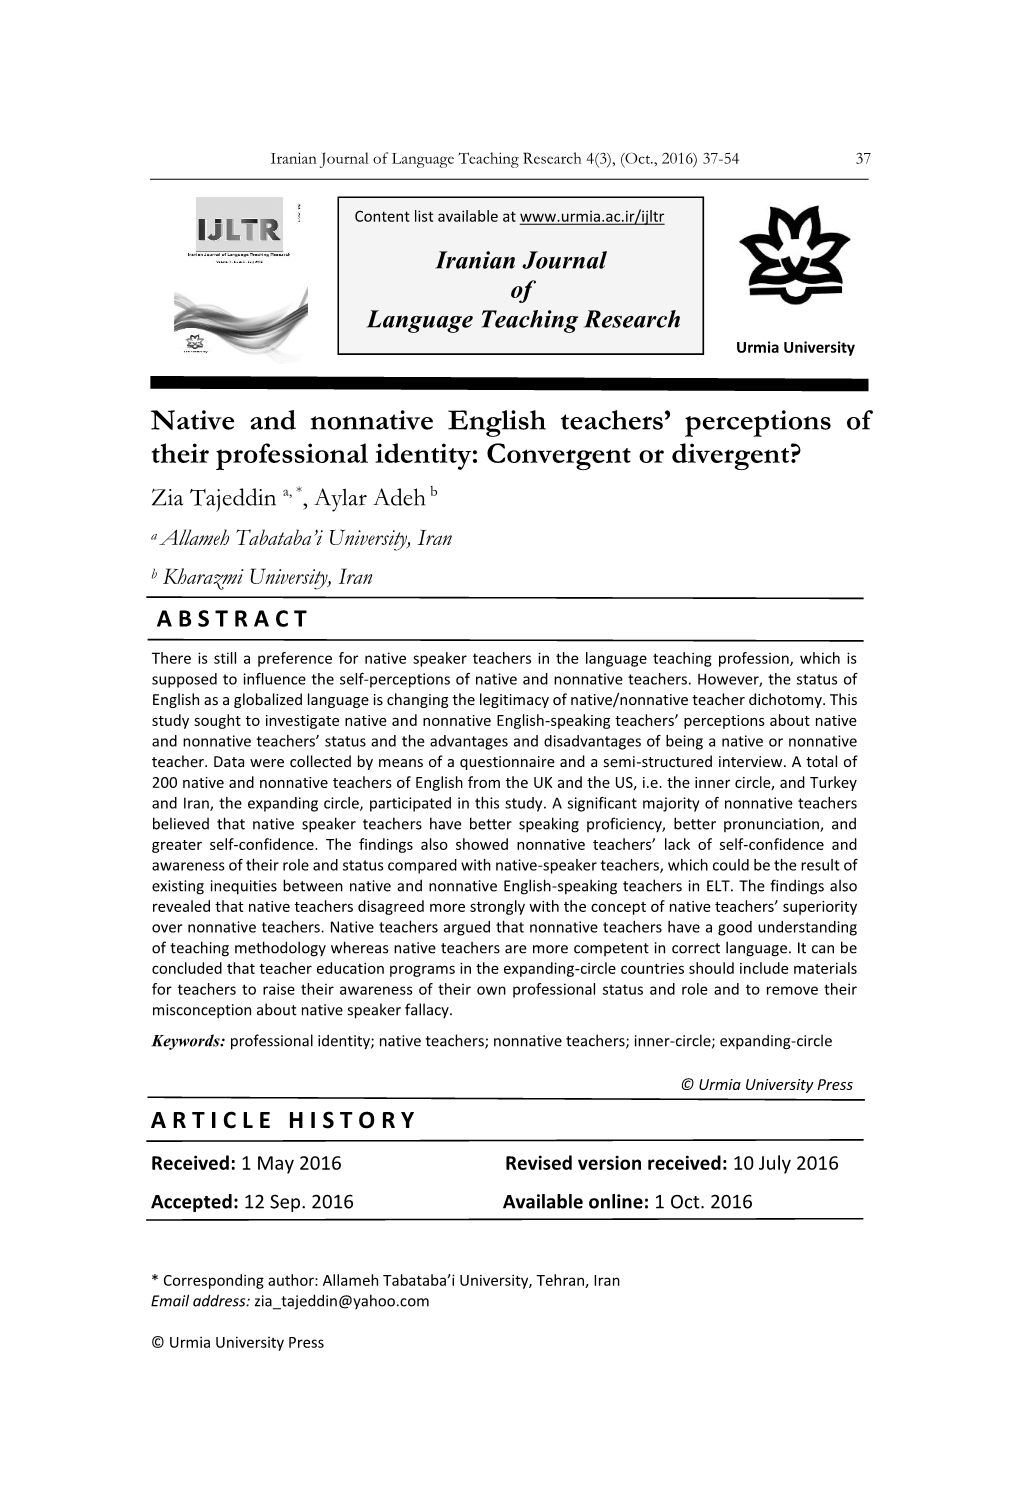 Native and Nonnative English Teachers' Perceptions of Their